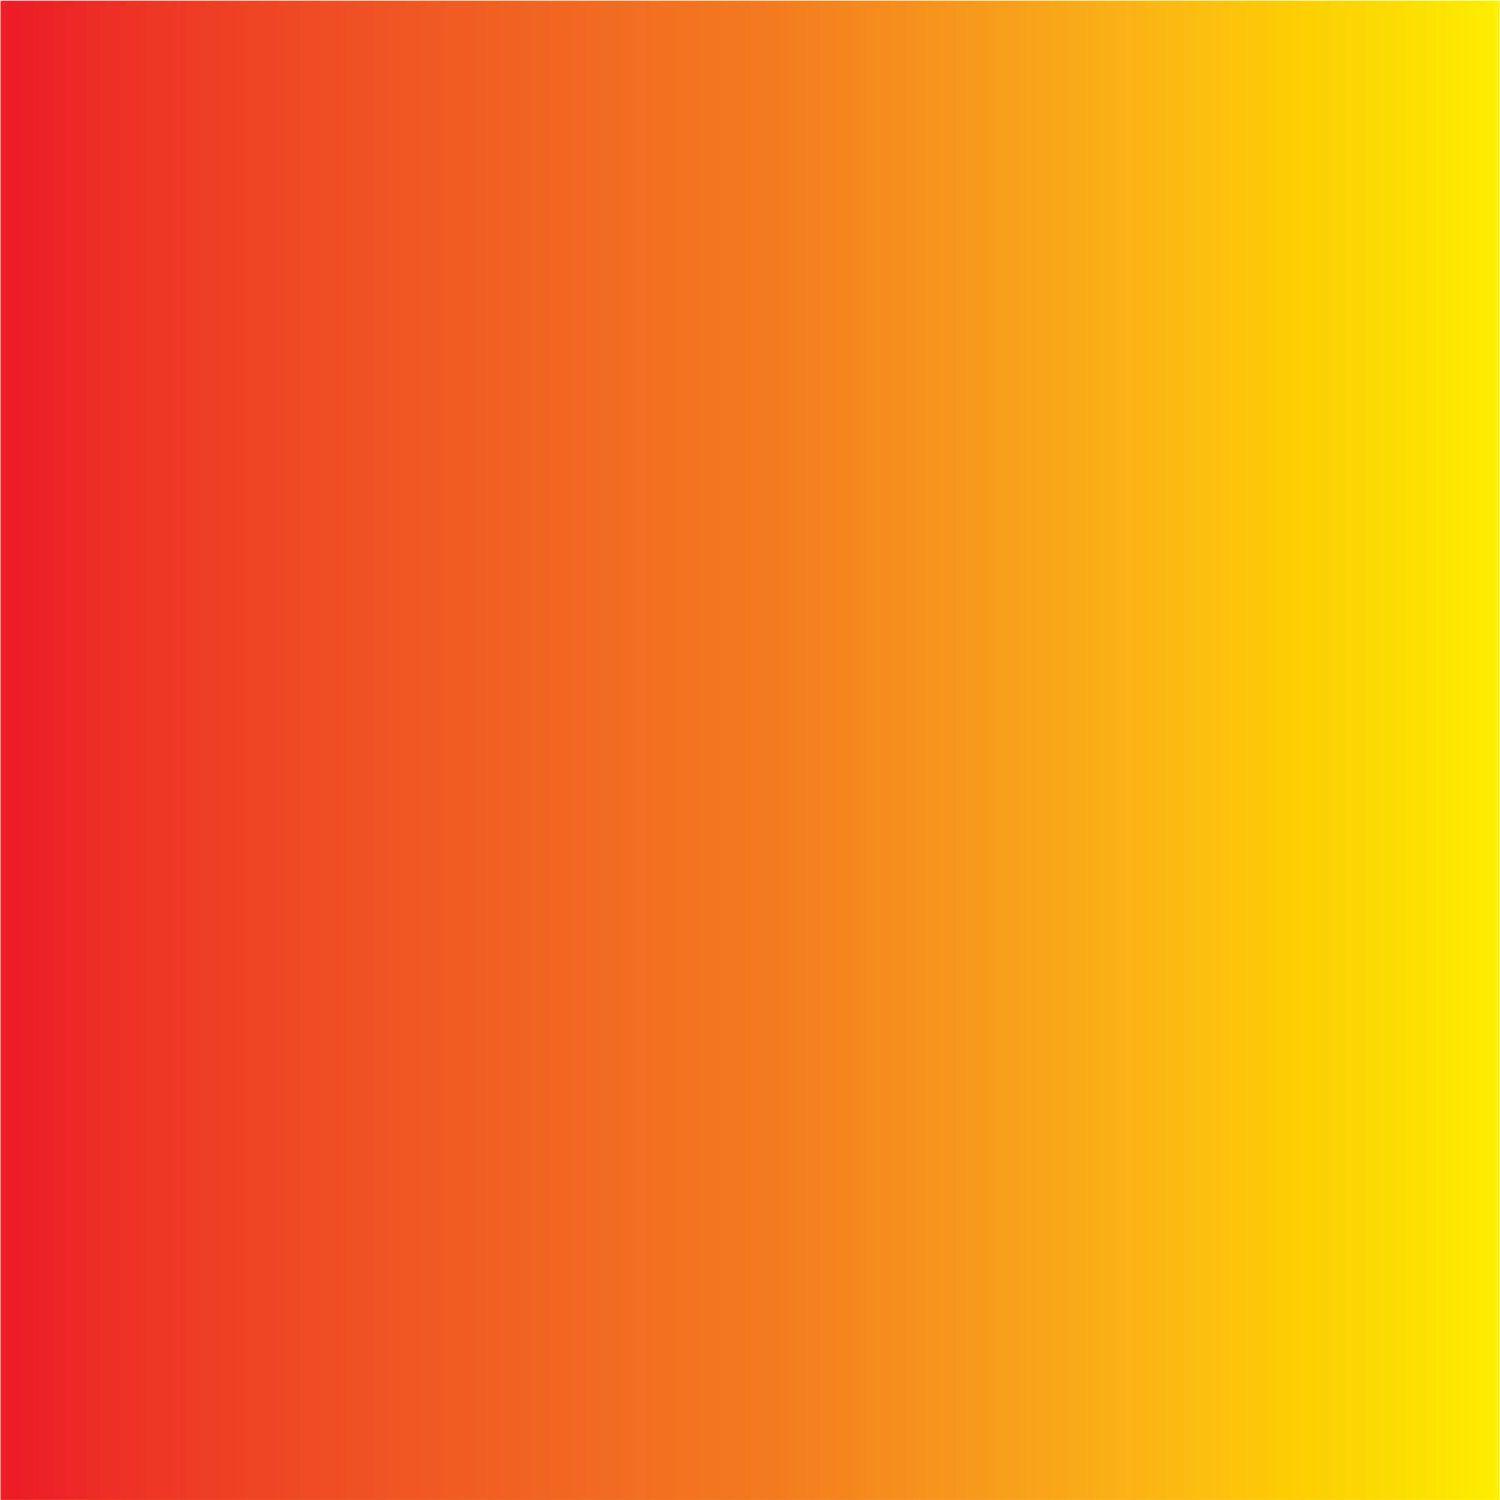 Red, orange and yellow Ombre print craft vinyl sheet